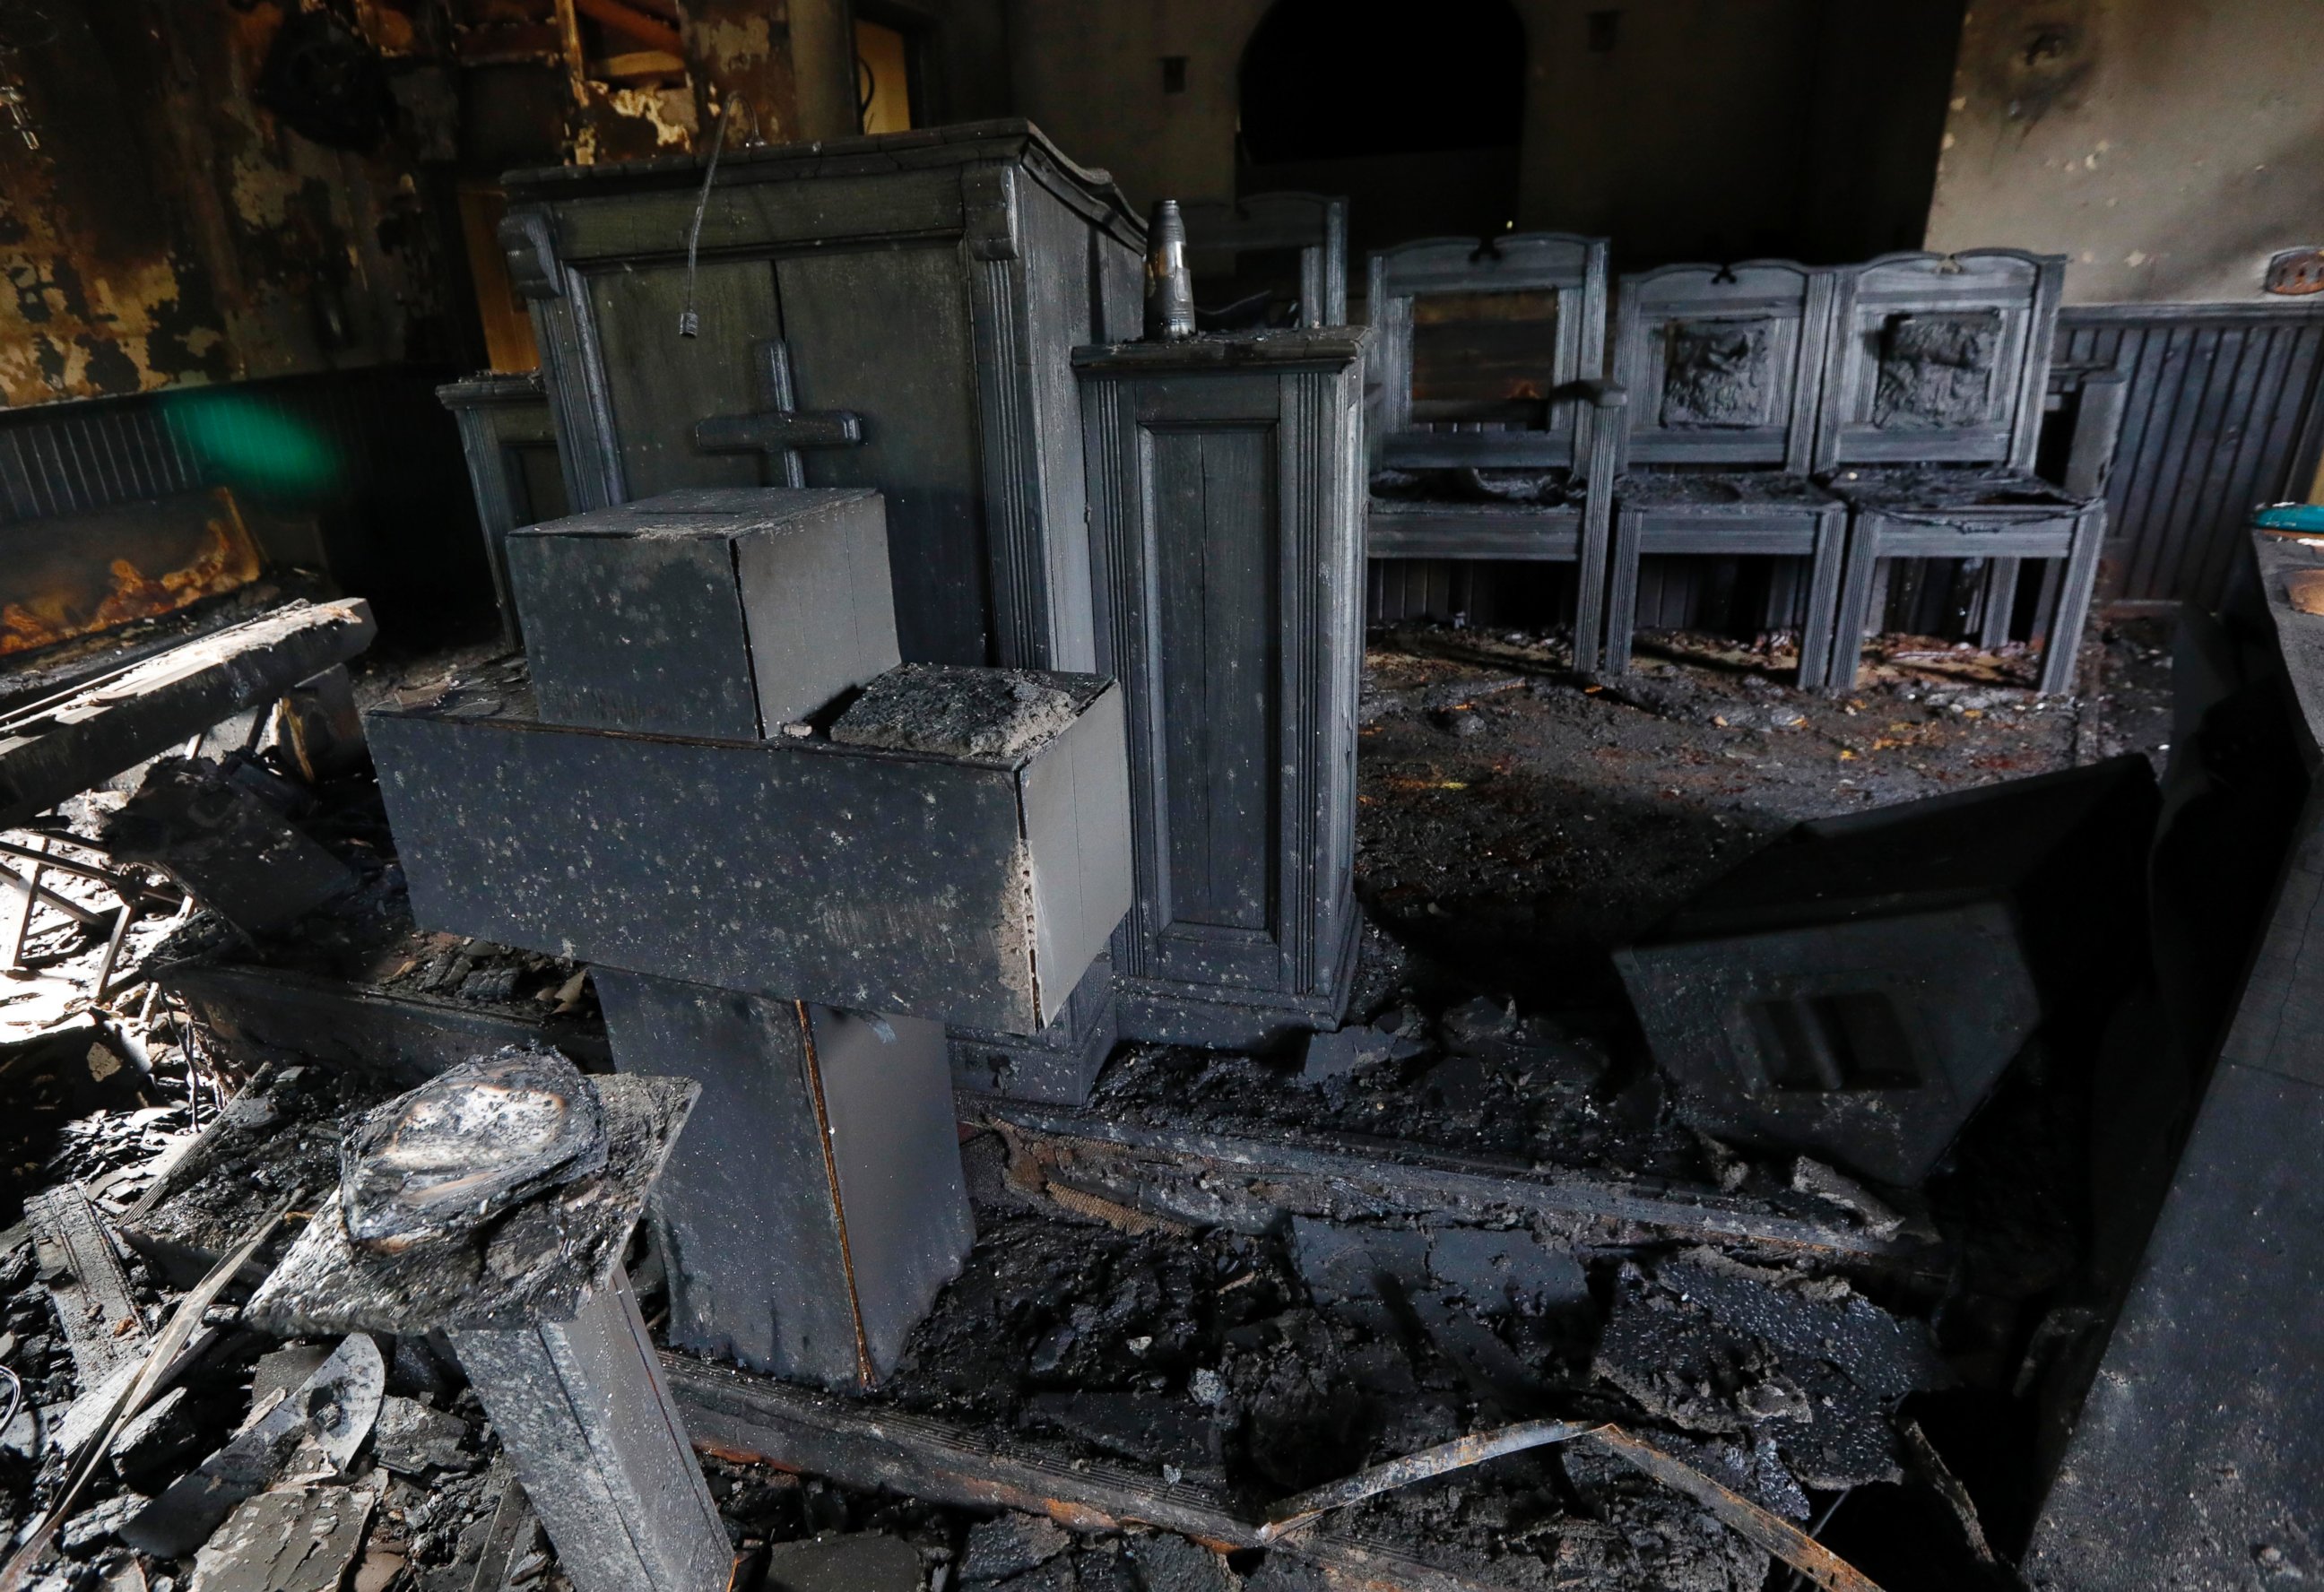 PHOTO: Burned pews, destroyed musical instruments, Bibles and hymnals are part of the debris inside the fire damaged Hopewell M.B. Baptist Church in Greenville, Mississippi, Nov. 2, 2016.